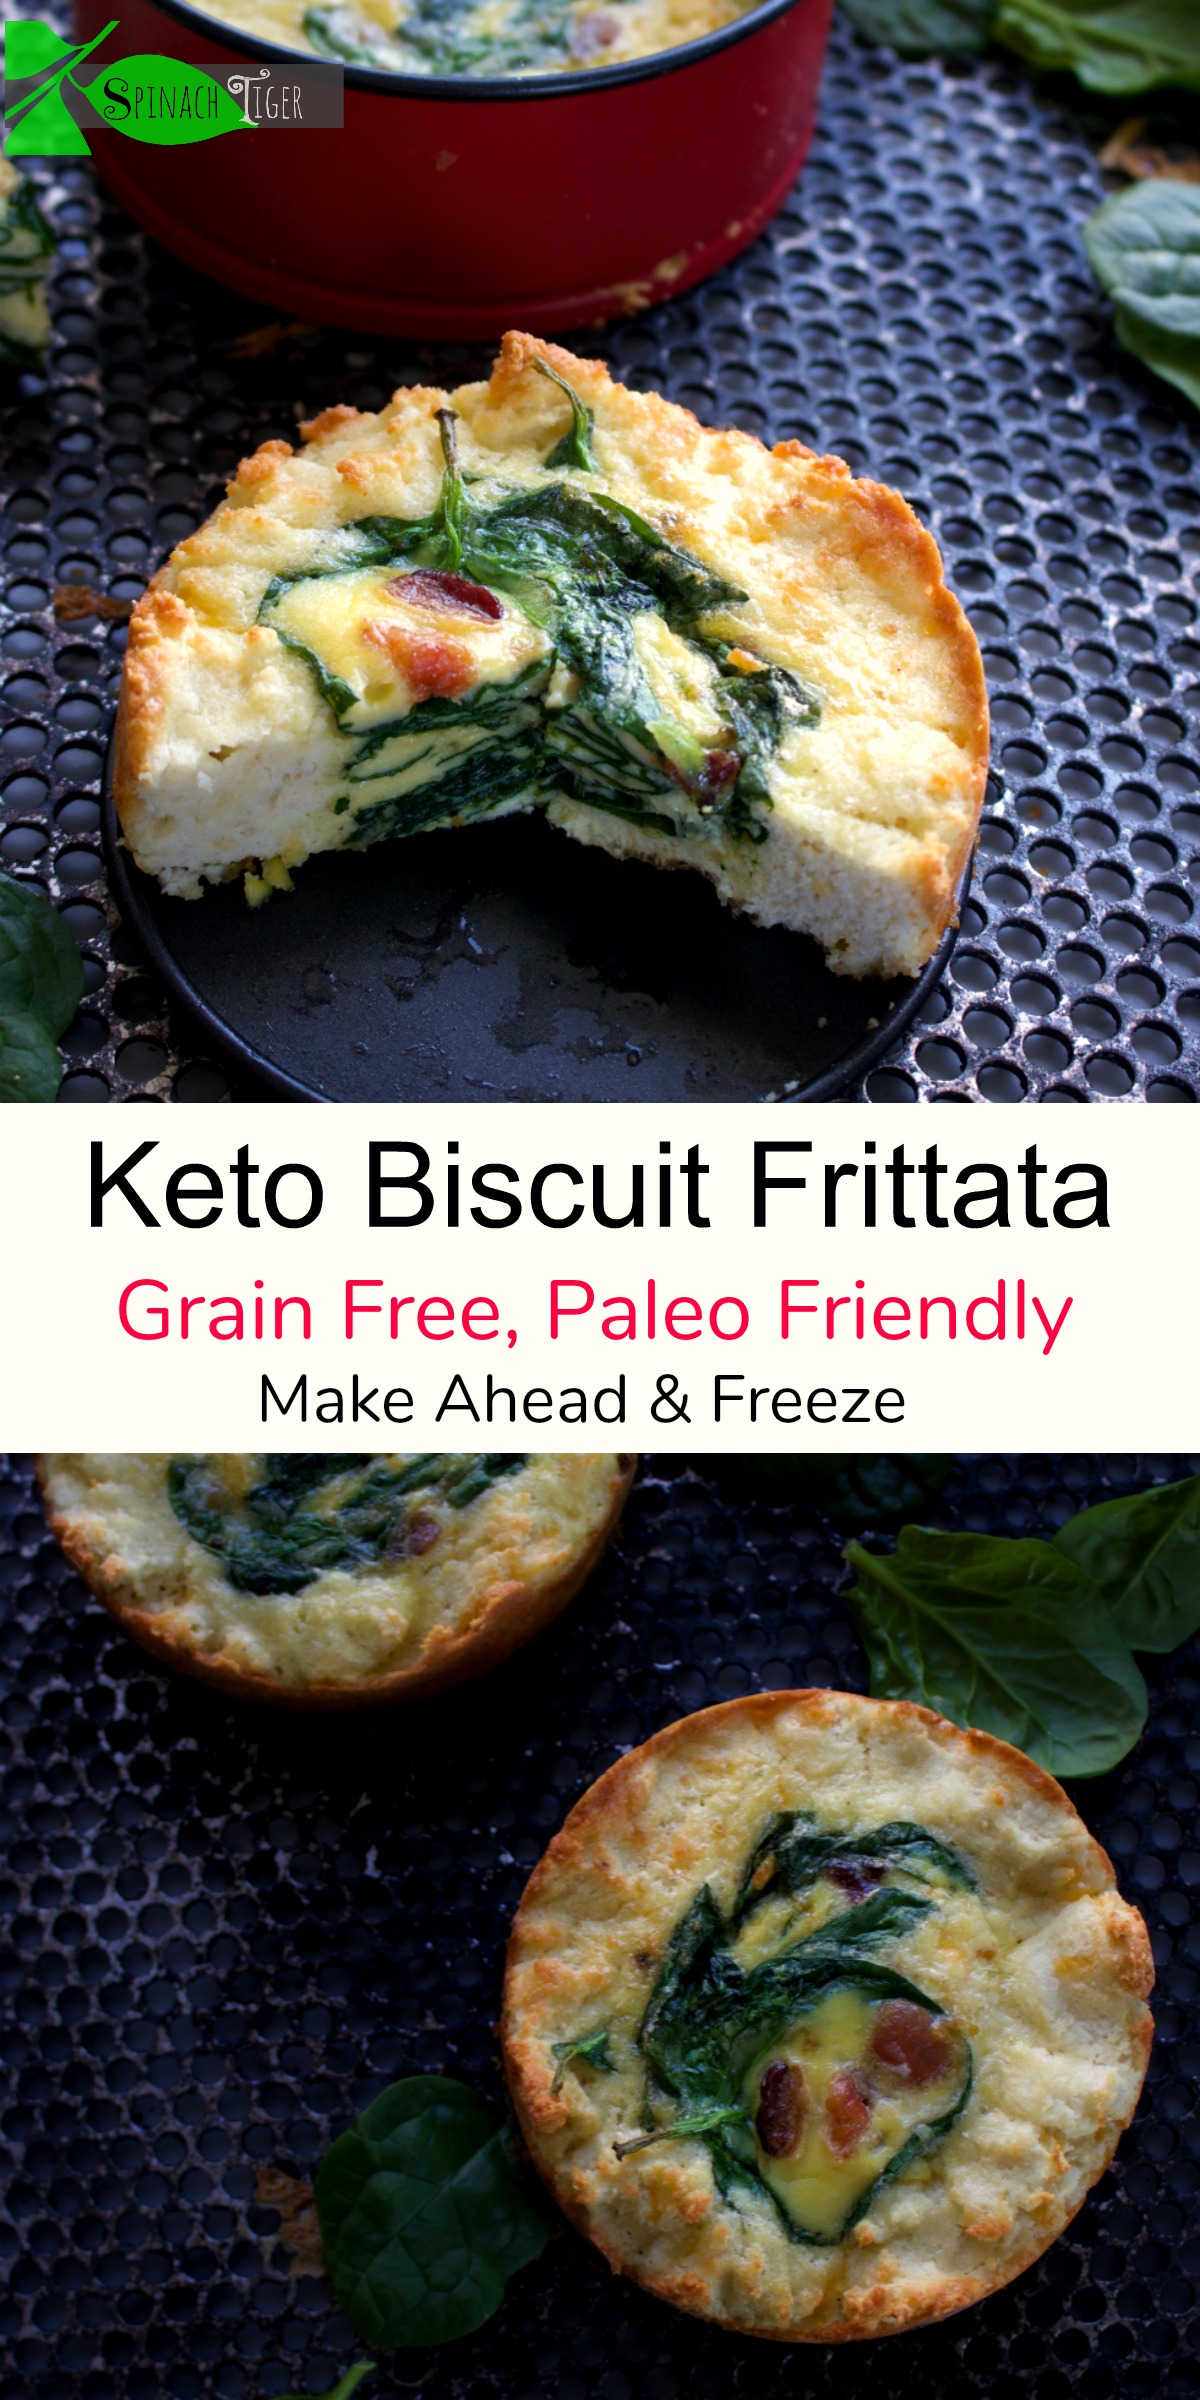 Keto Biscuit Frittata, Grain Free, Paleo Friendly, from Spinach Tiger